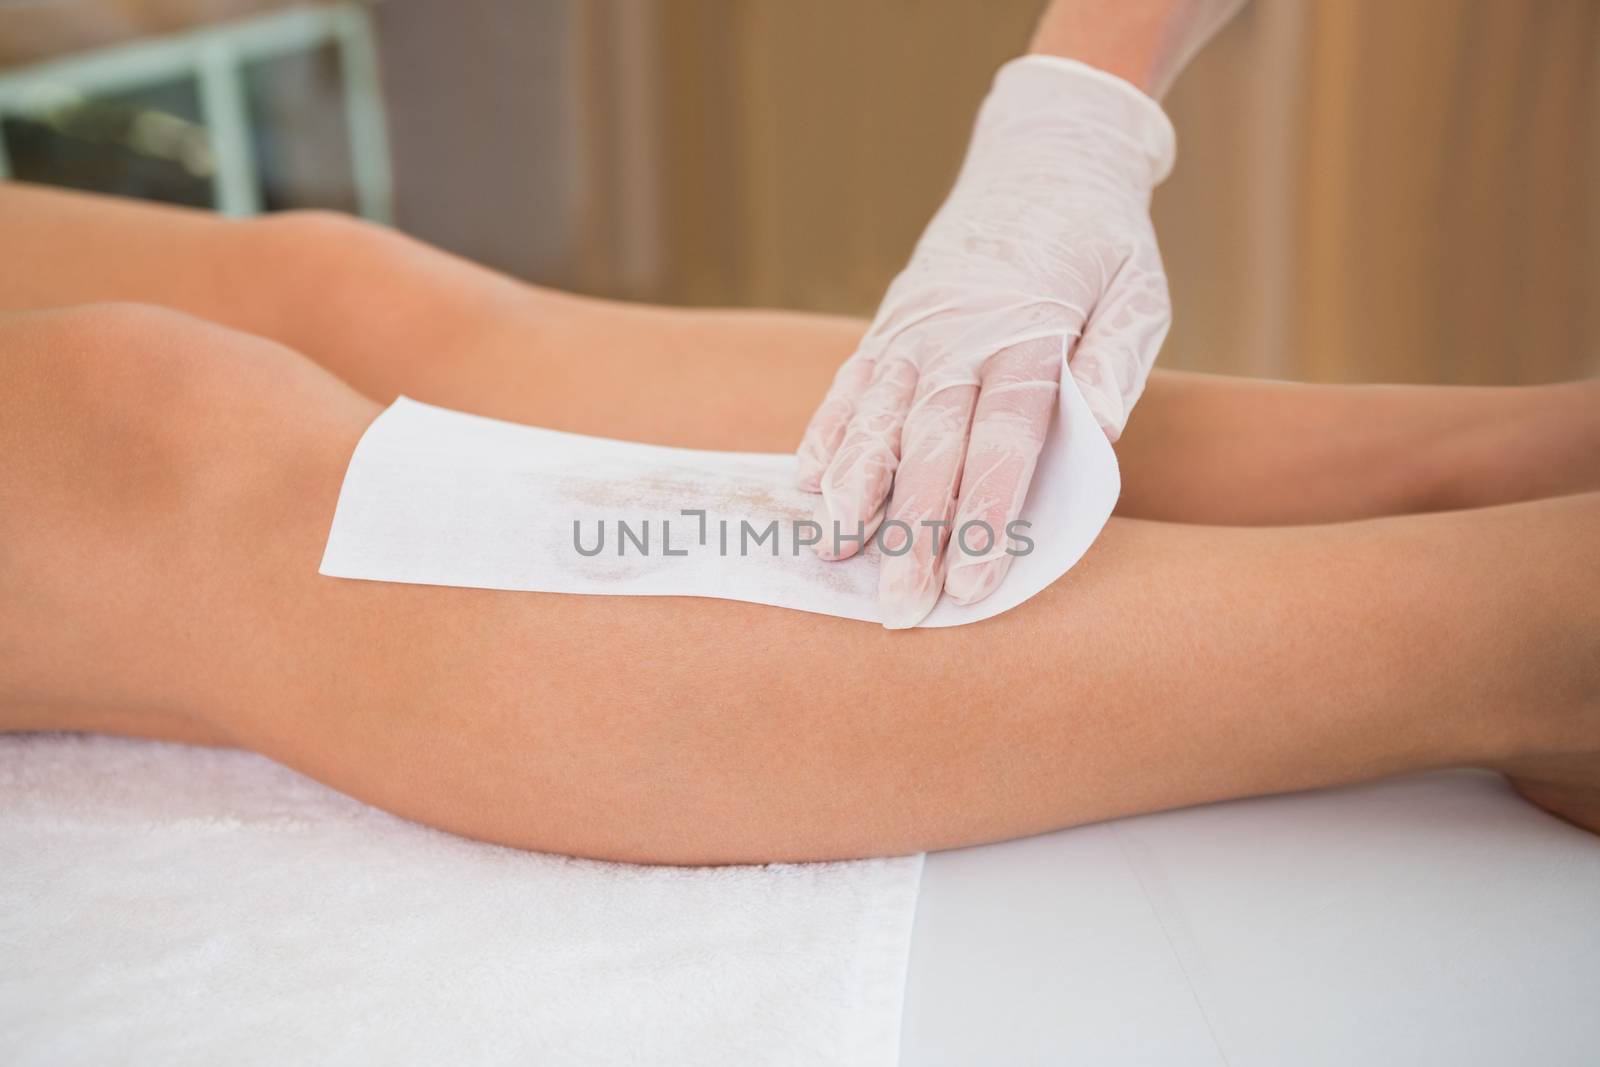 Woman getting her legs waxed by beauty therapist in the health spa